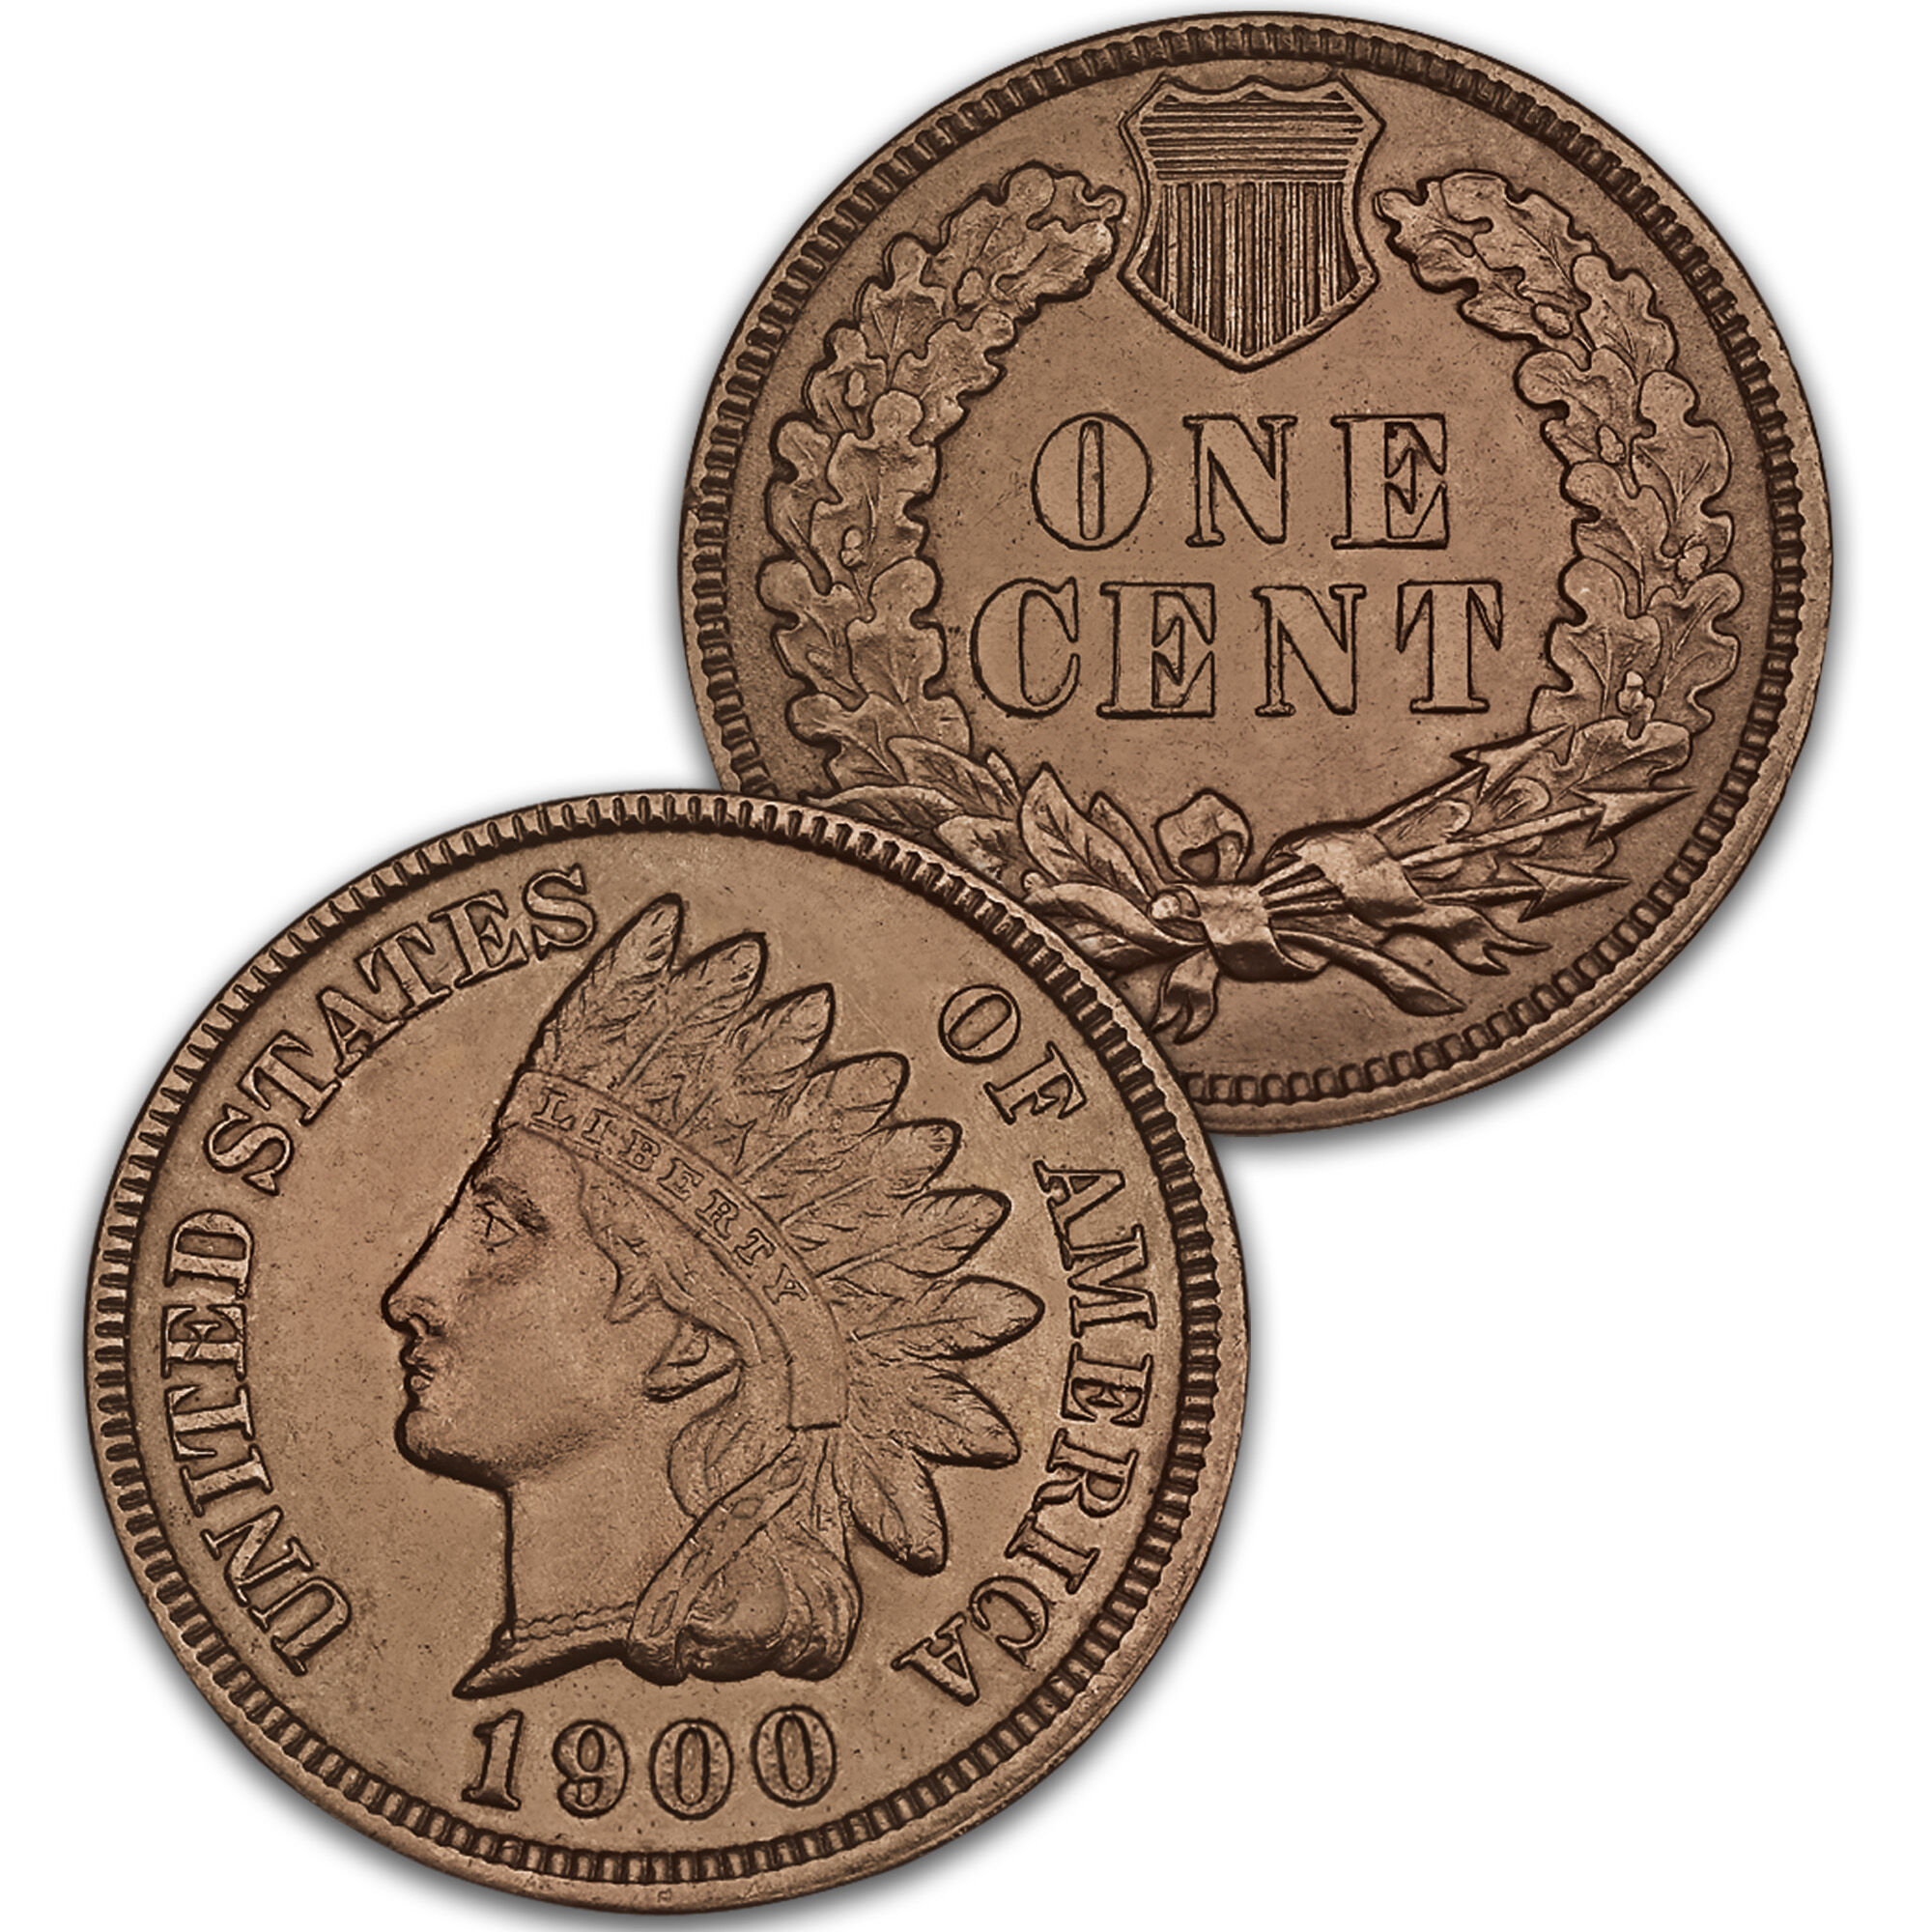 The Uncirculated Collection of Indian Head Pennies and Buffalo Nickels